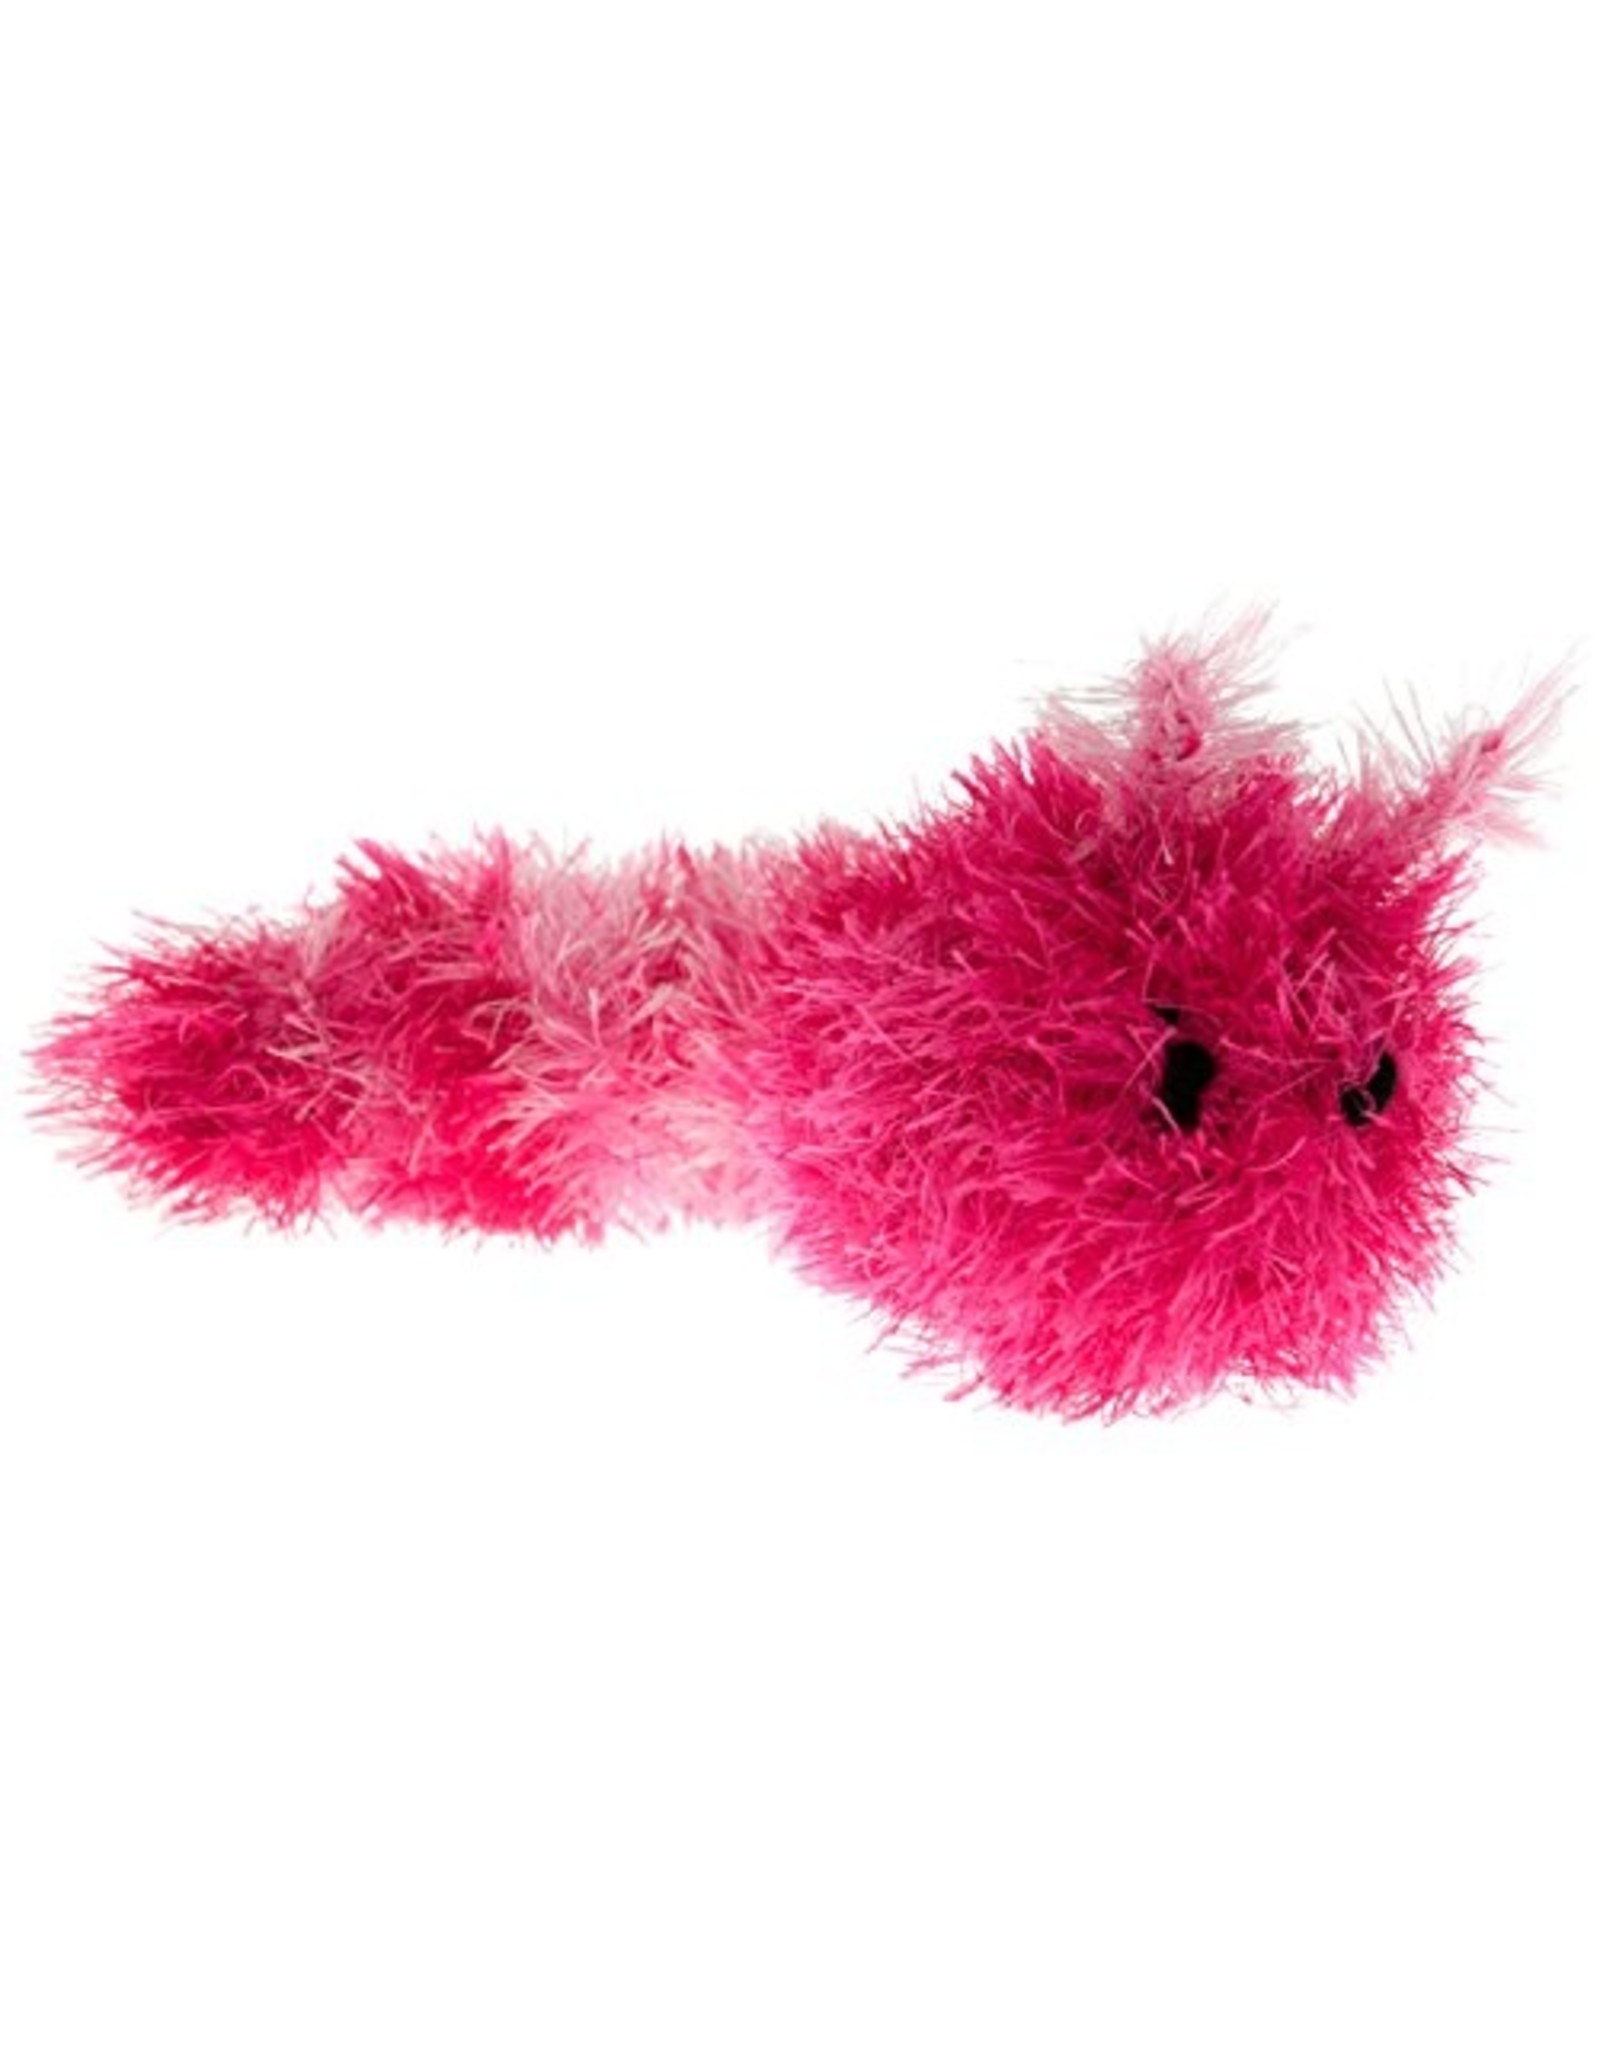 Oomaloo Handmade Squeaky Toy Caterpillar Large